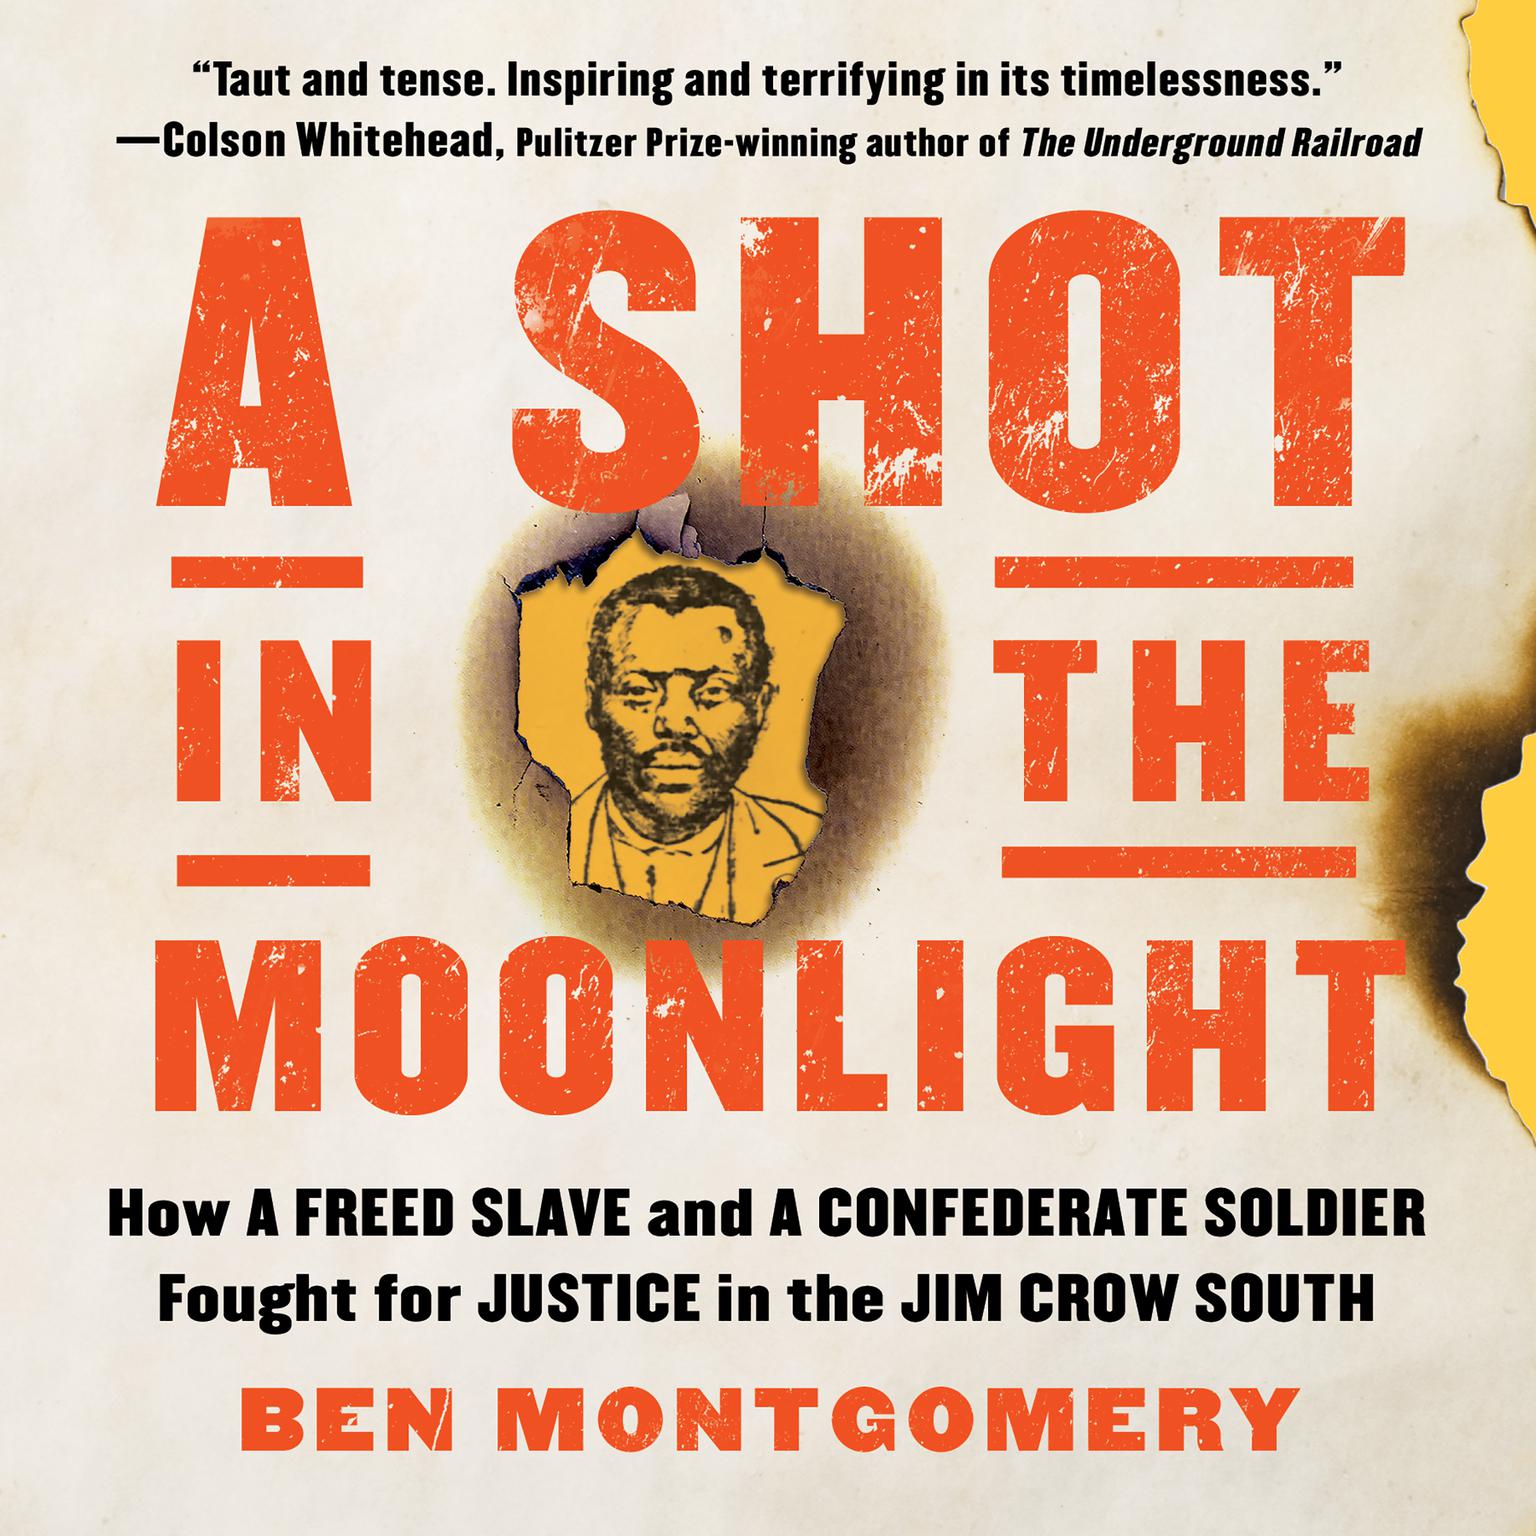 A Shot in the Moonlight: How a Freed Slave and a Confederate Soldier Fought for Justice in the Jim Crow South Audiobook, by Ben Montgomery